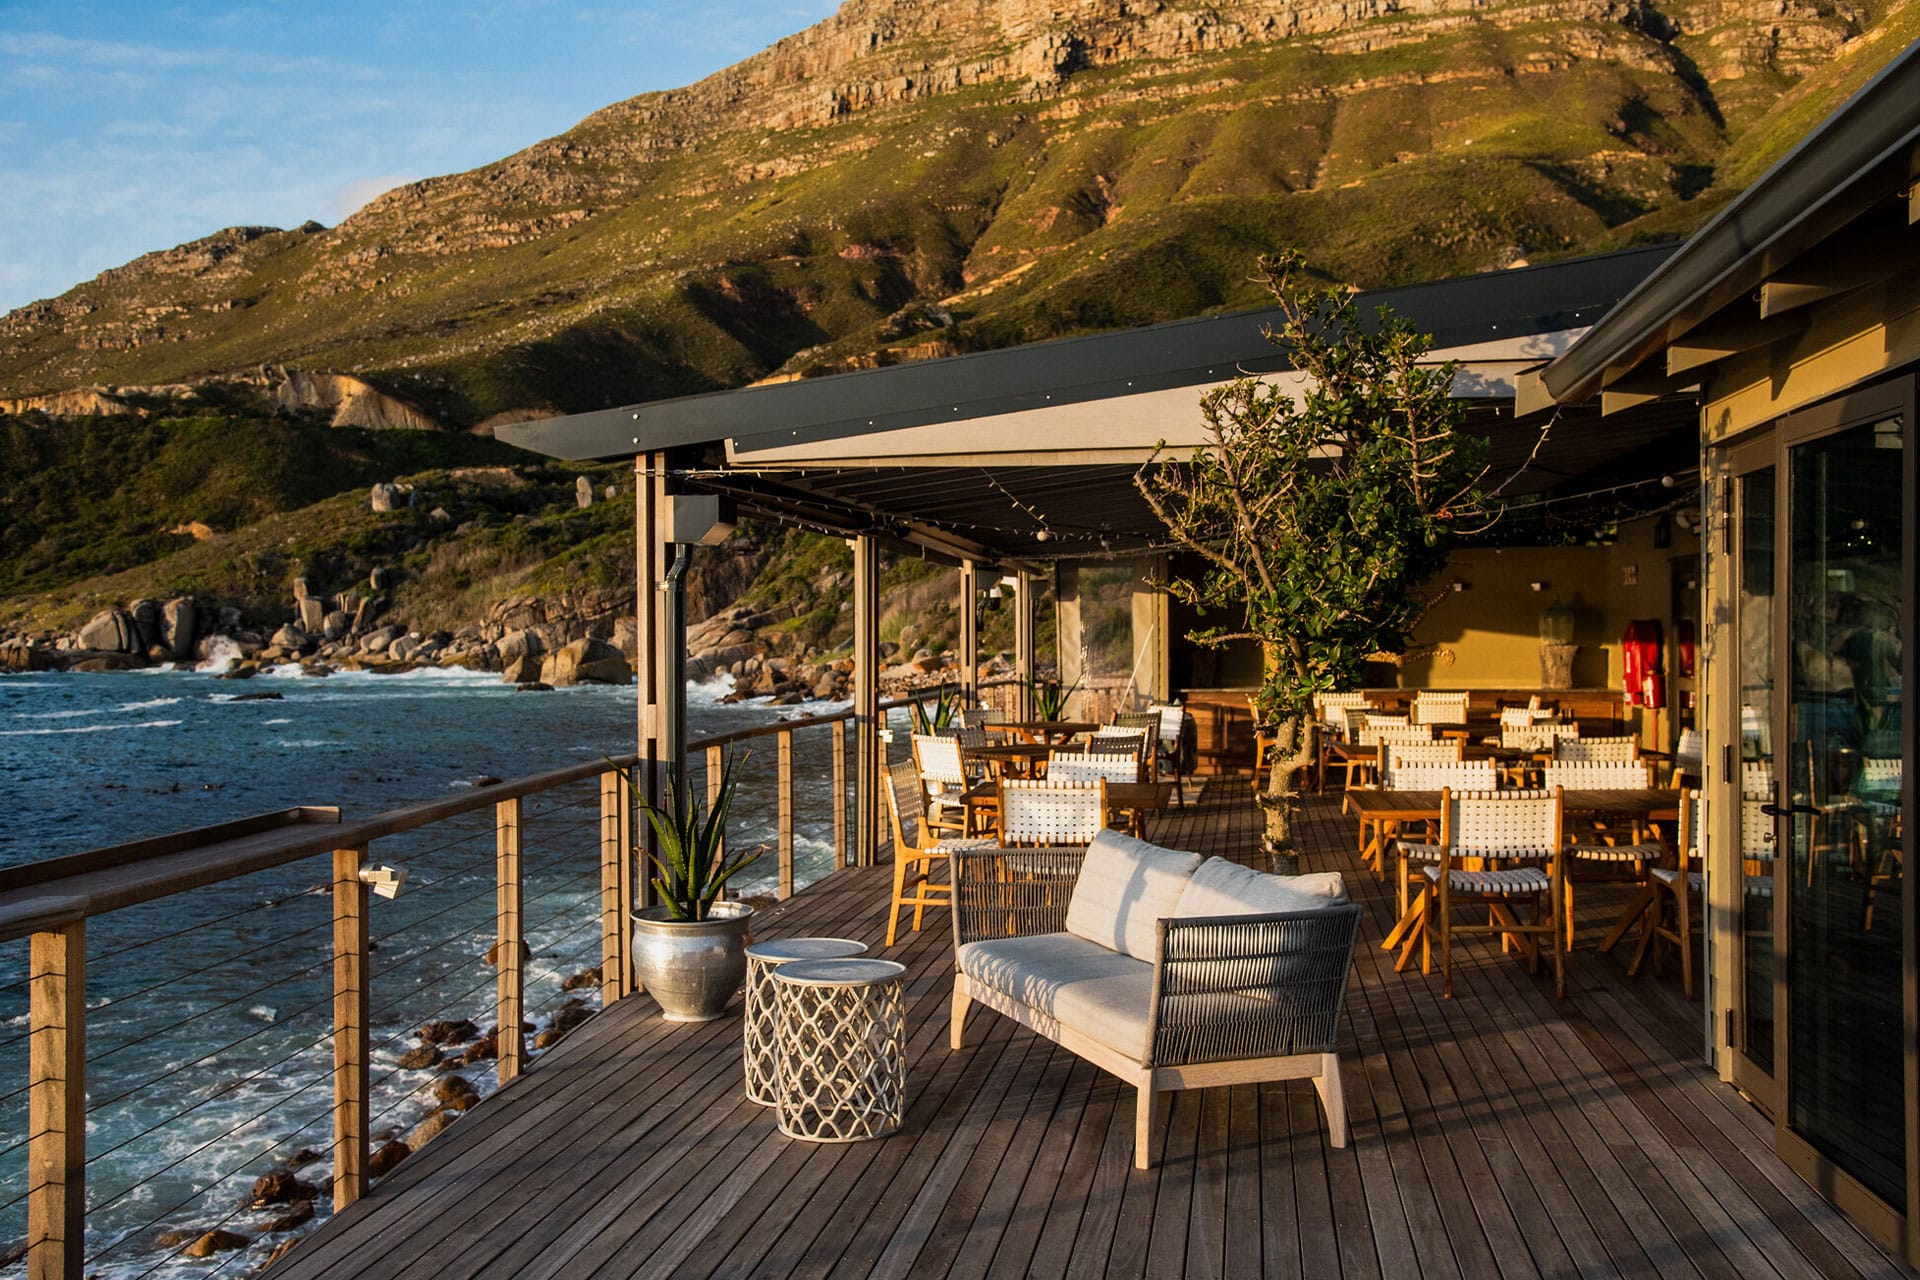 The al fresco dining area with views of the Table Mountain National Park and Atlantic Ocean at Chefs Warehouse Tintswalo Atlantic – one of the top 10 fine dining restaurants in Cape Town.